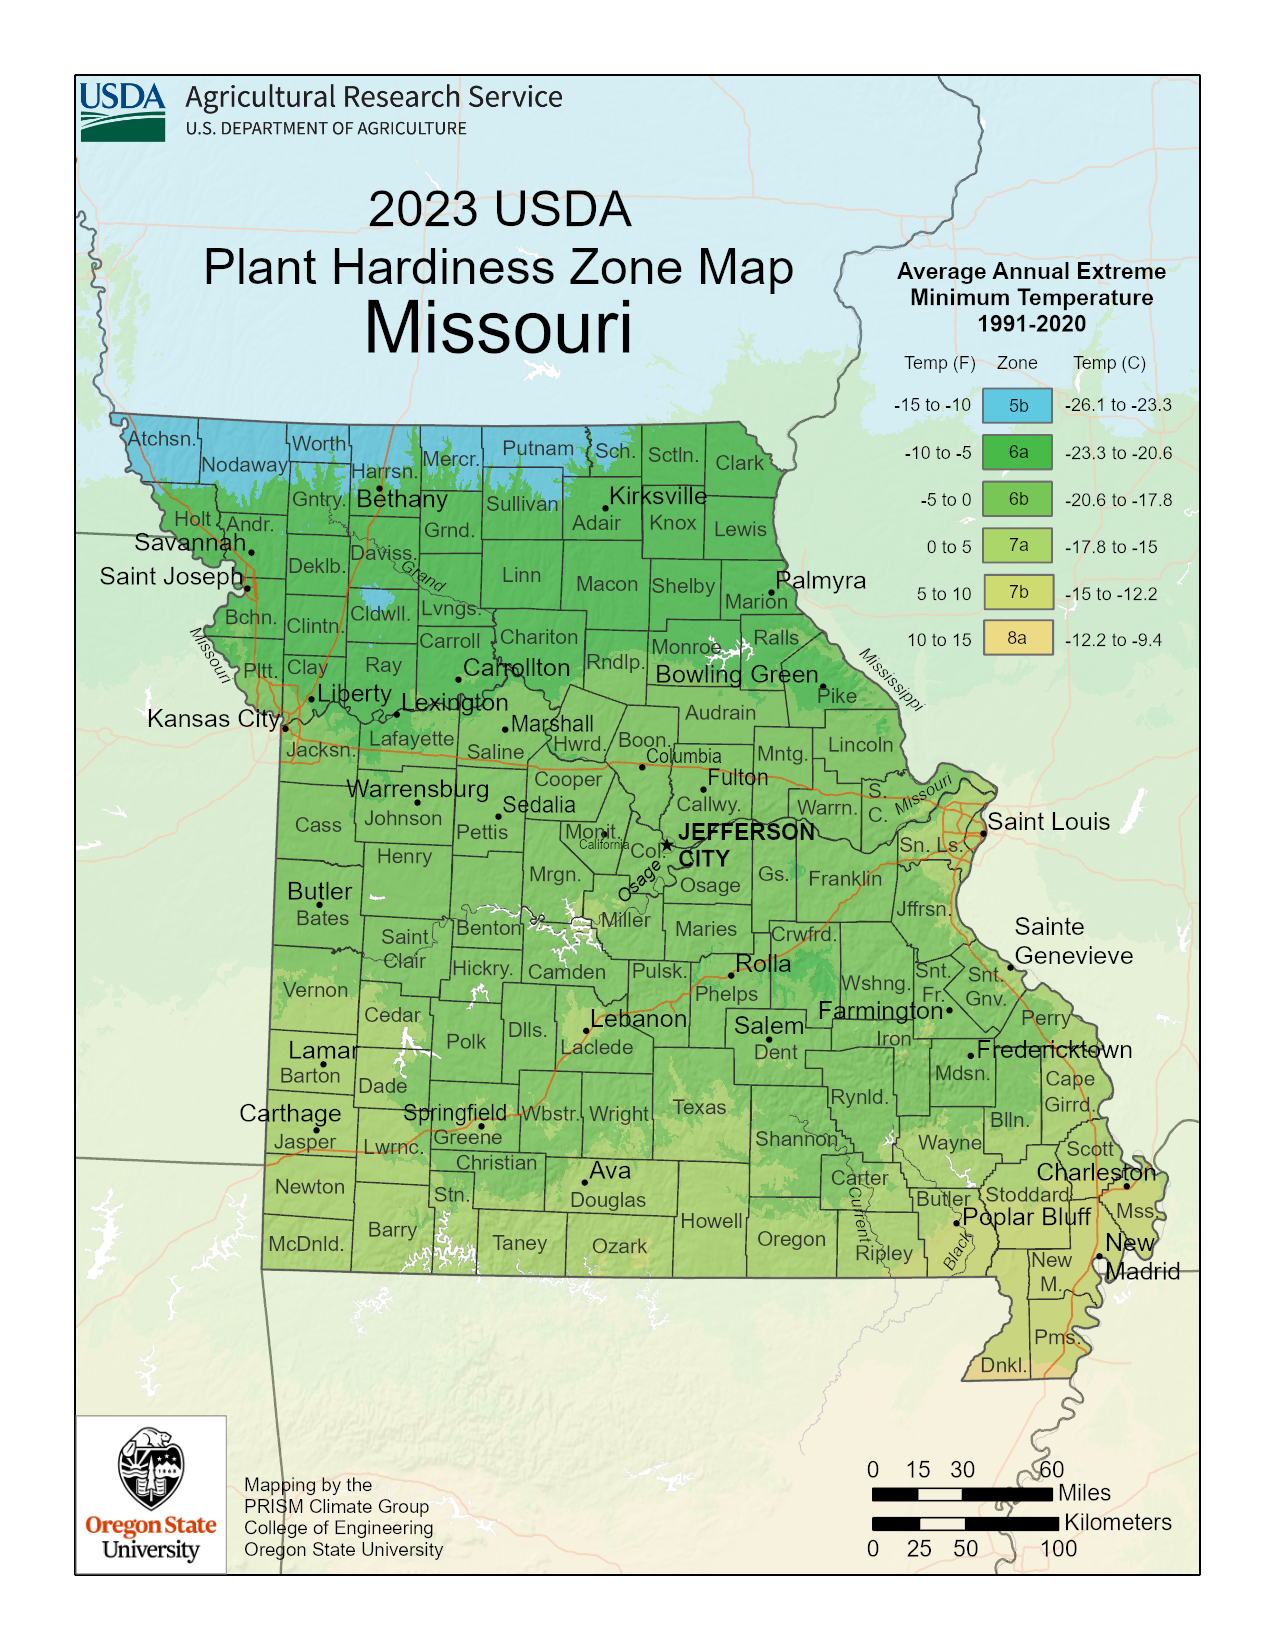 What is My USDA Planting Zone? - Food Gardening Network